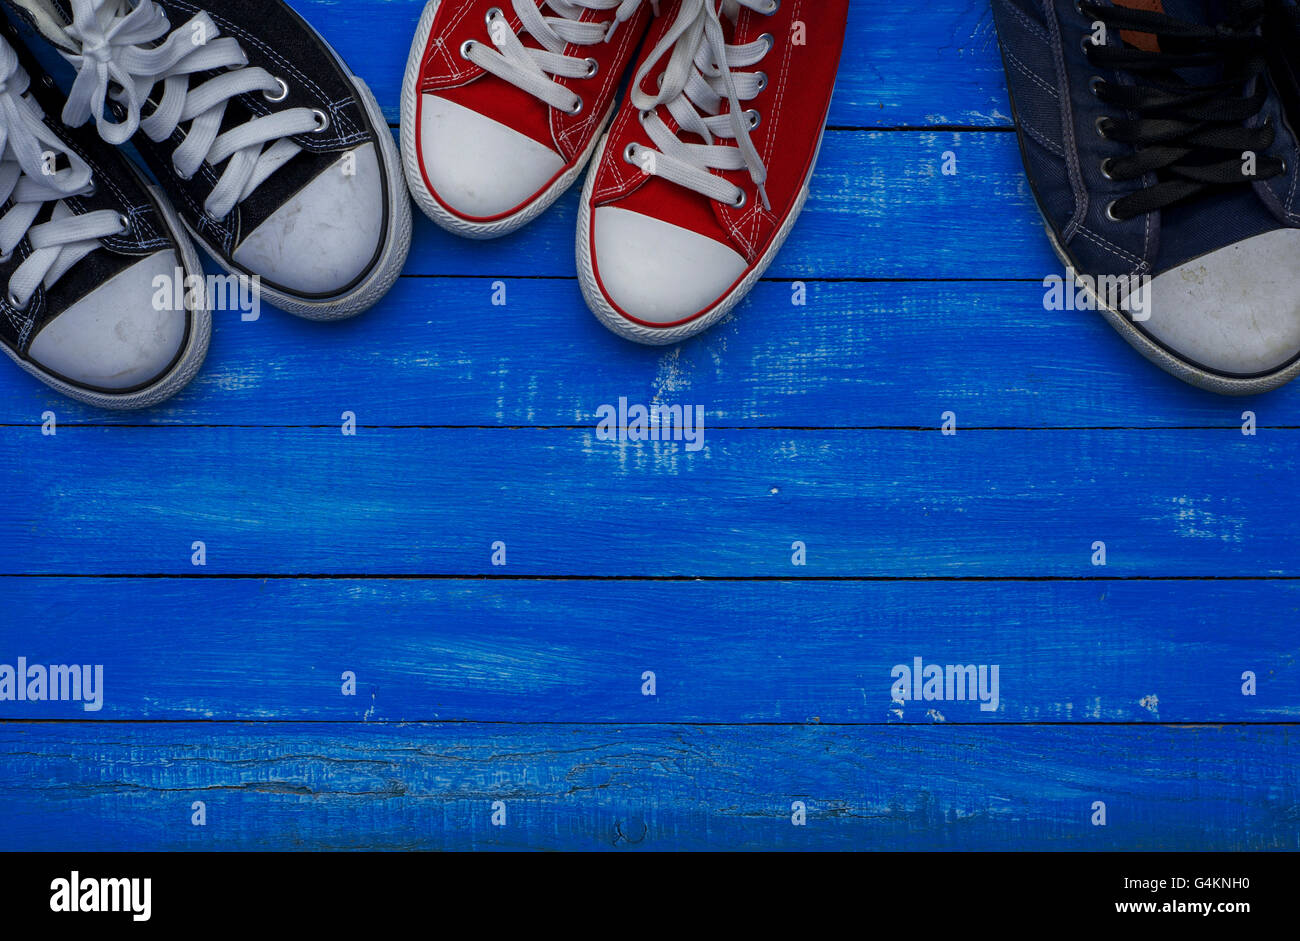 Three pairs of sneakers of different sizes on a blue vintage wooden floor Stock Photo